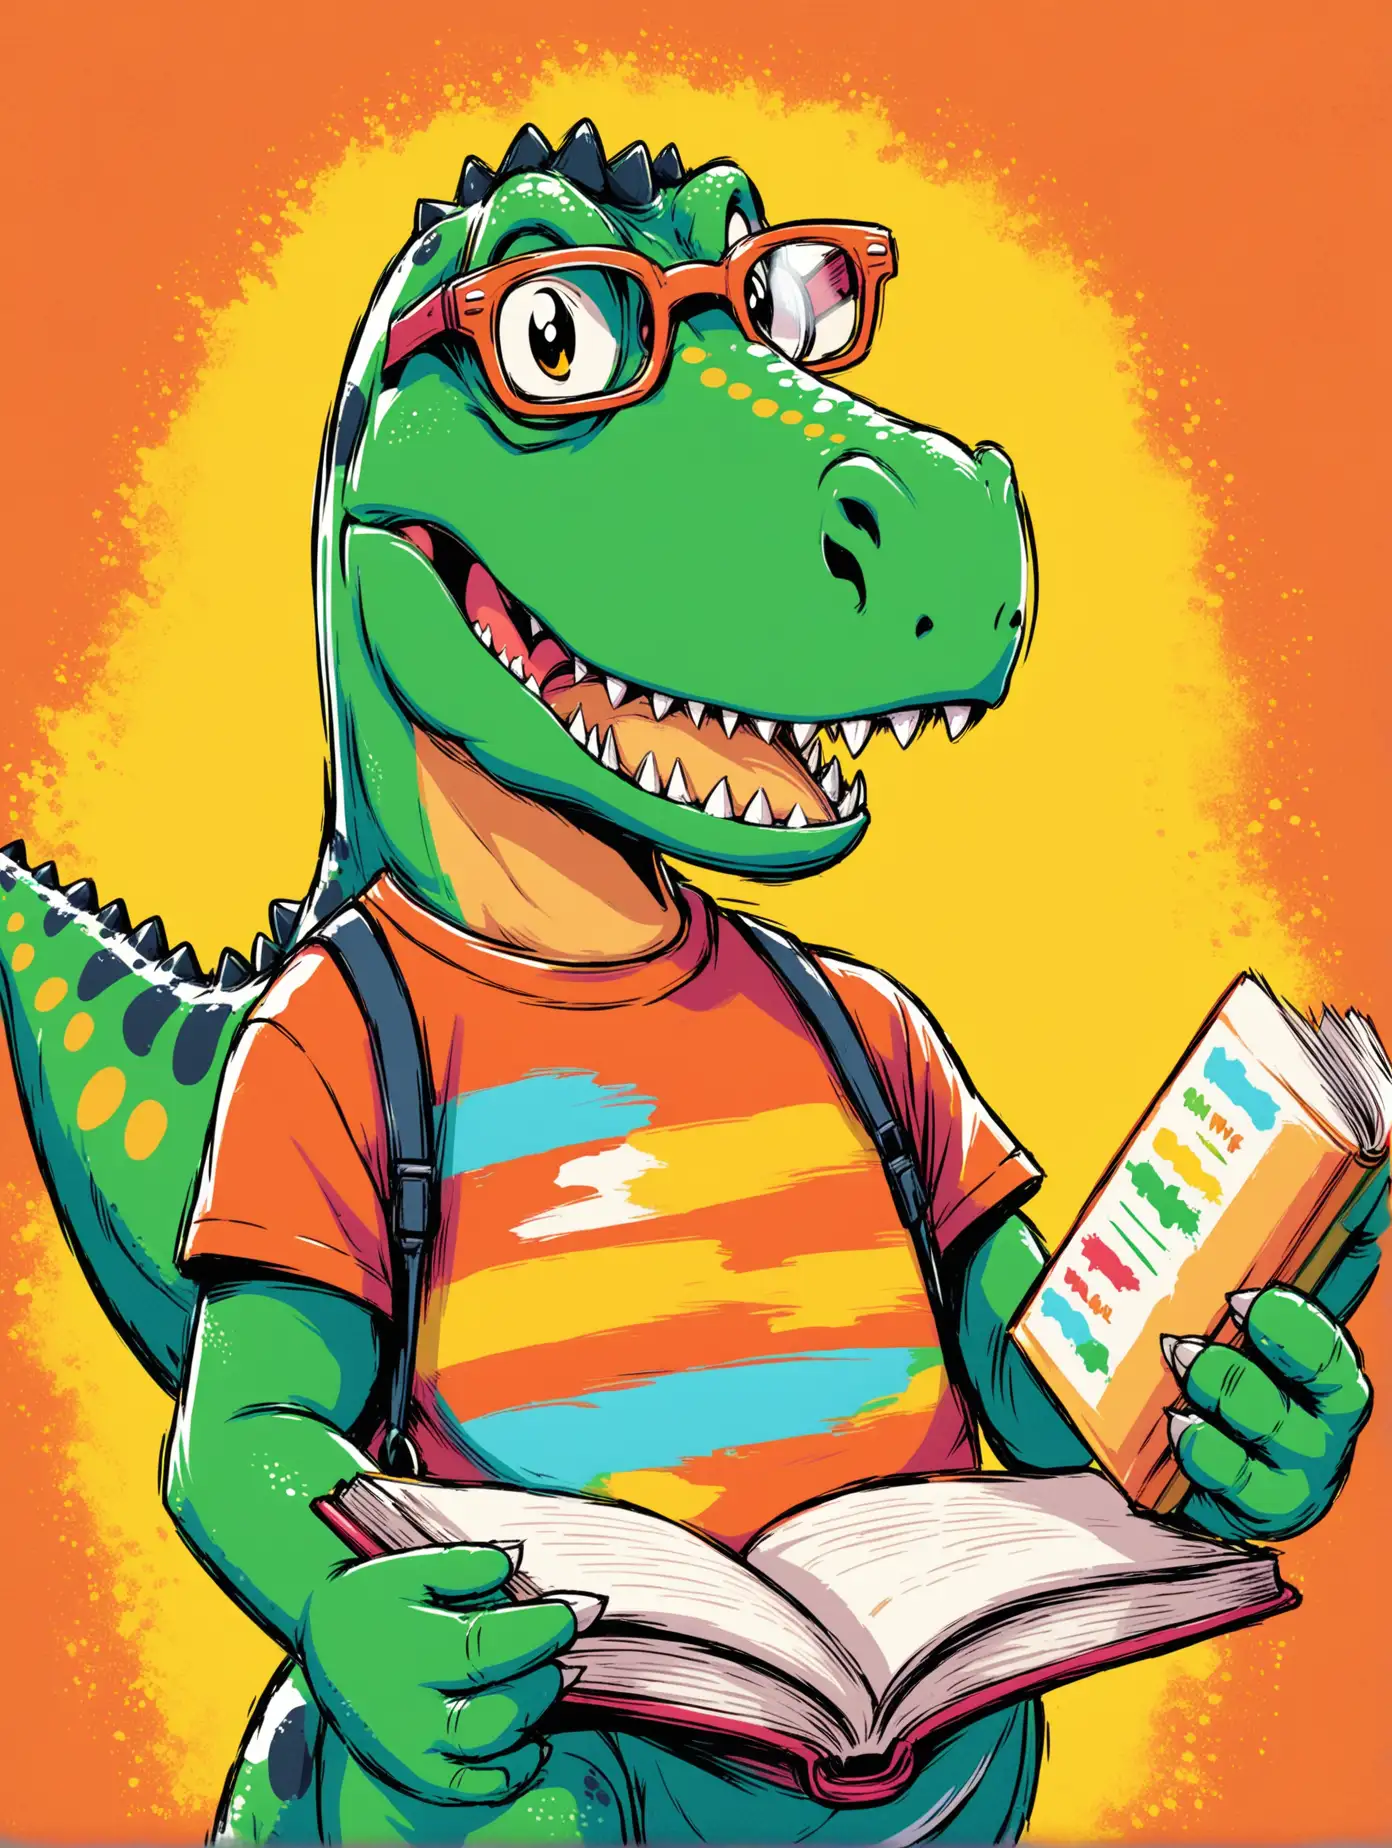 painting of a T-Rex Dinosaur wearing reading glasses and holding a book with a smug expression on his face, in the style of a boy's graphic tee art, naive, childish, playful, fun and colorful